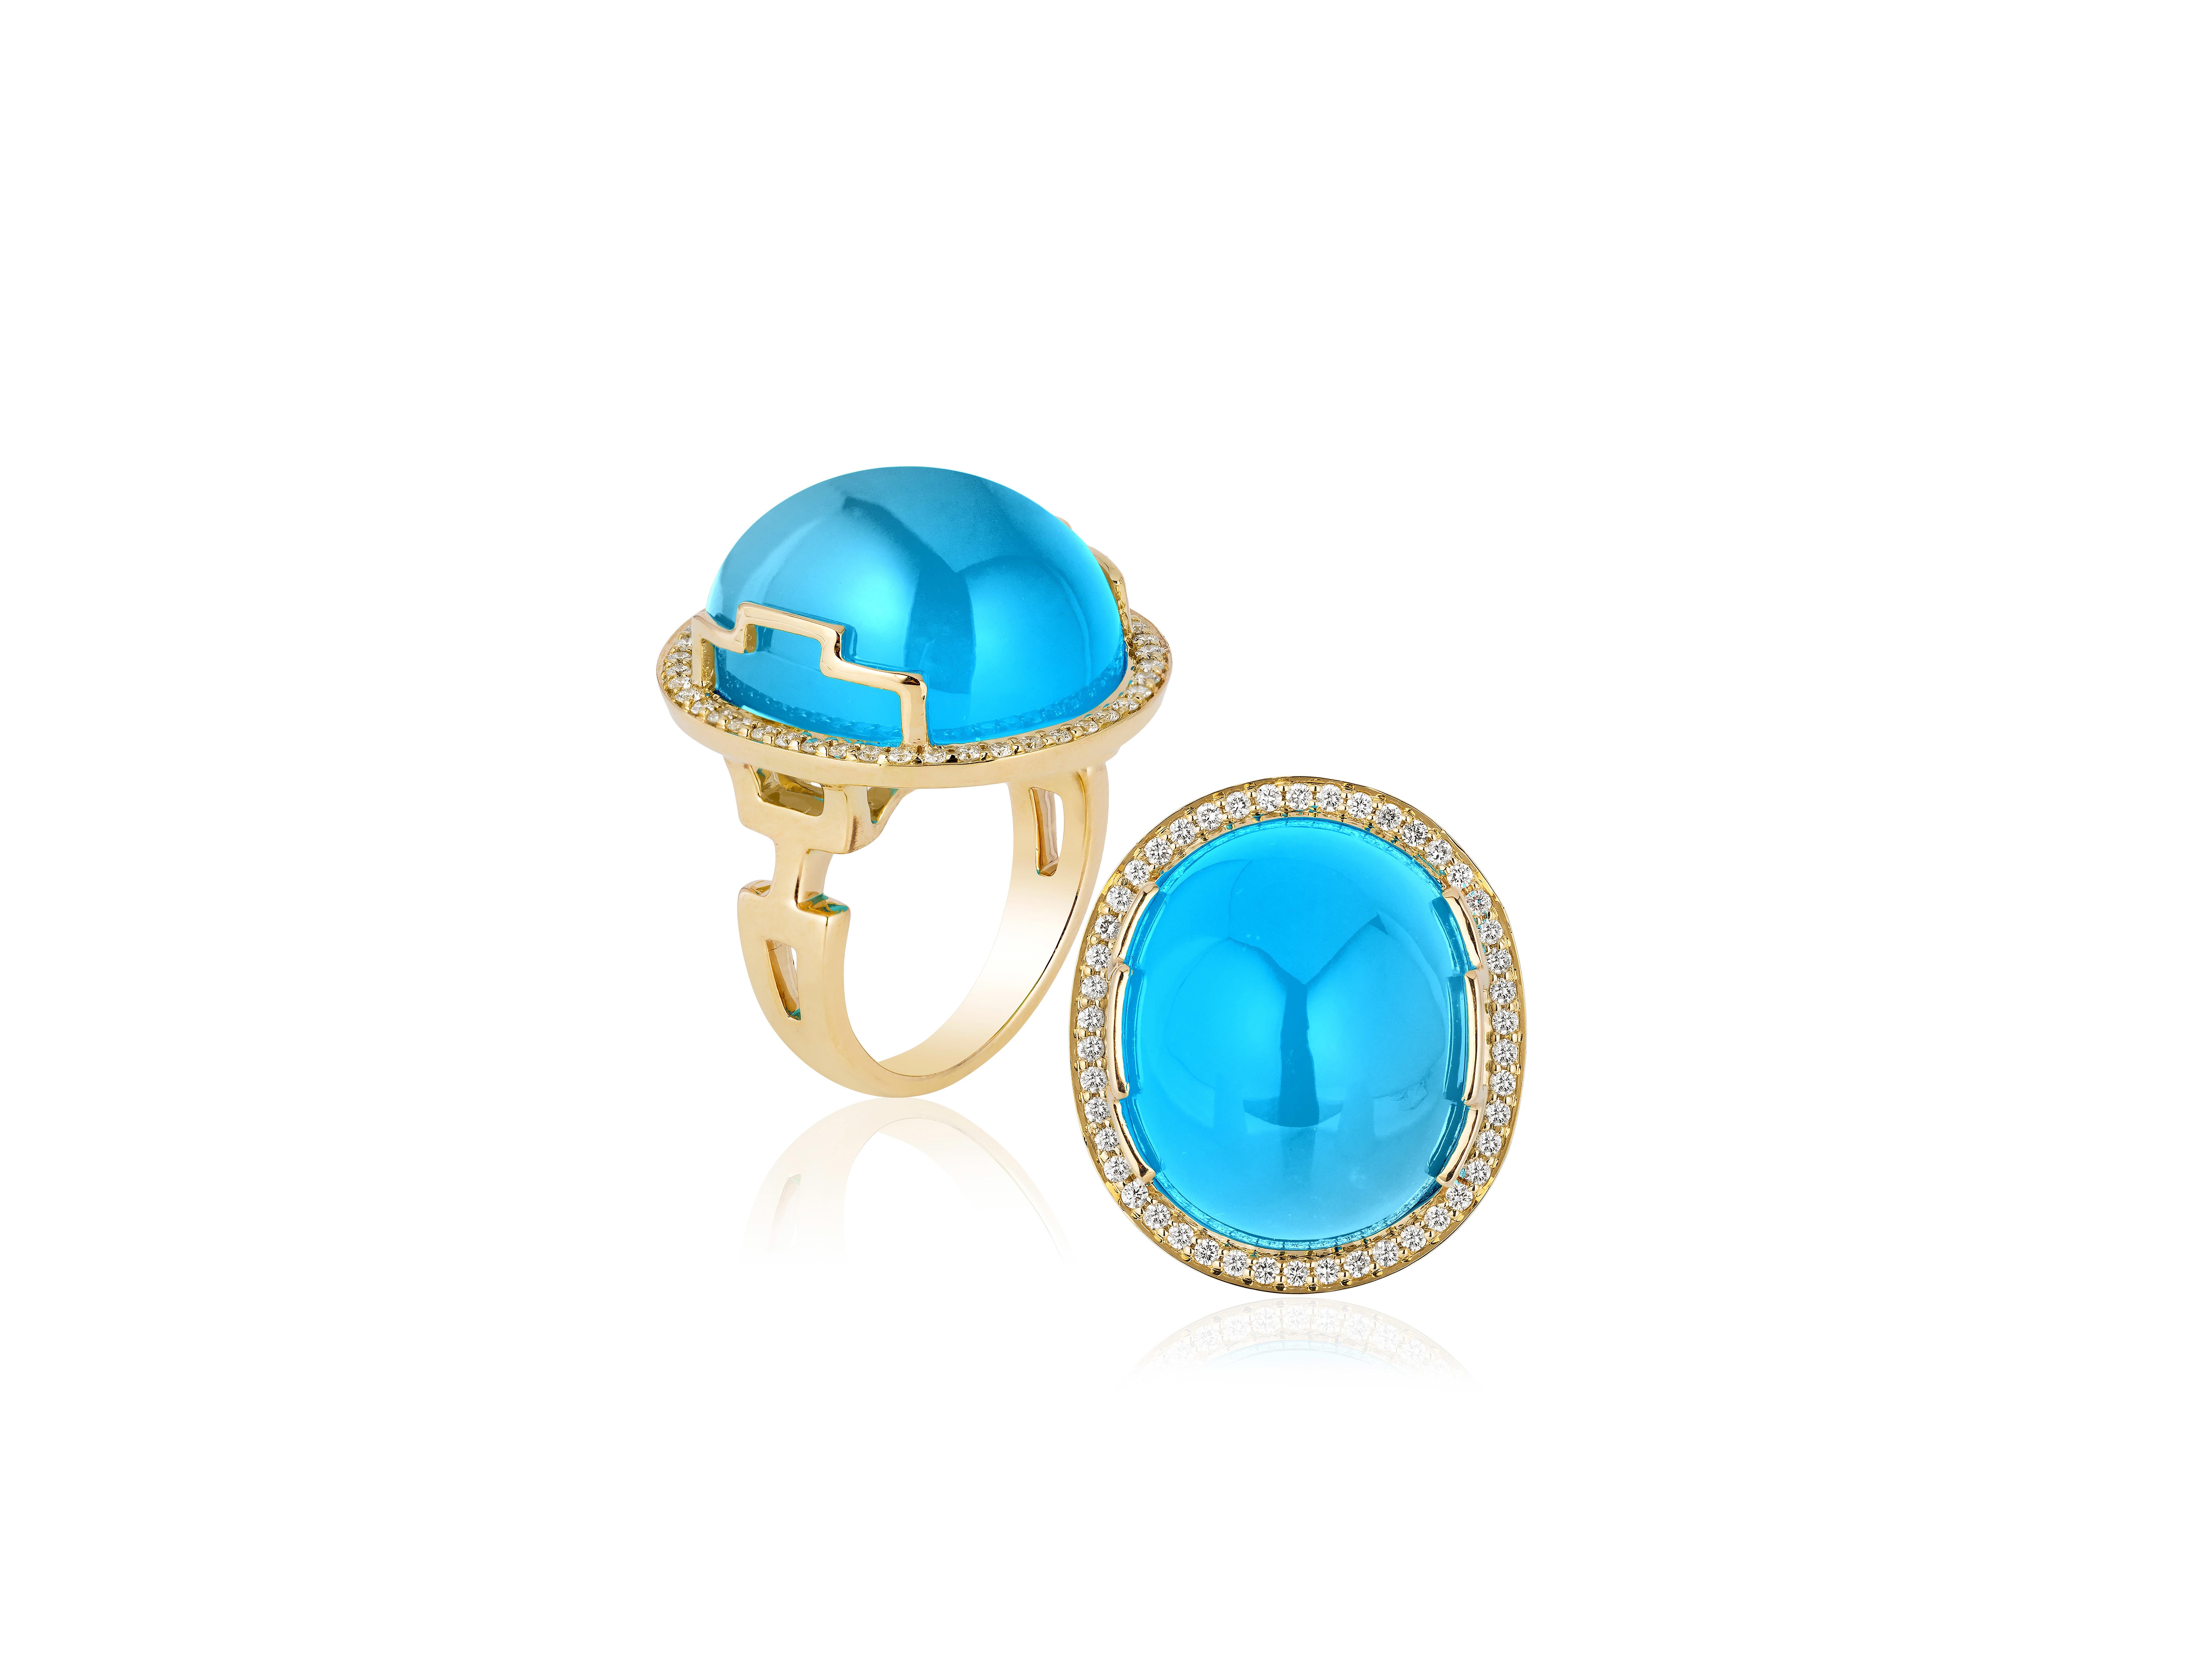 Blue Topaz Oval Cabochon Ring in 18K Yellow Gold, from 'Rock N Roll' Collection. Extensive collection of big and bold pieces. Like the music, this Rock ‘n Roll collection is electric in color and very stimulating to the eye. These exciting colors